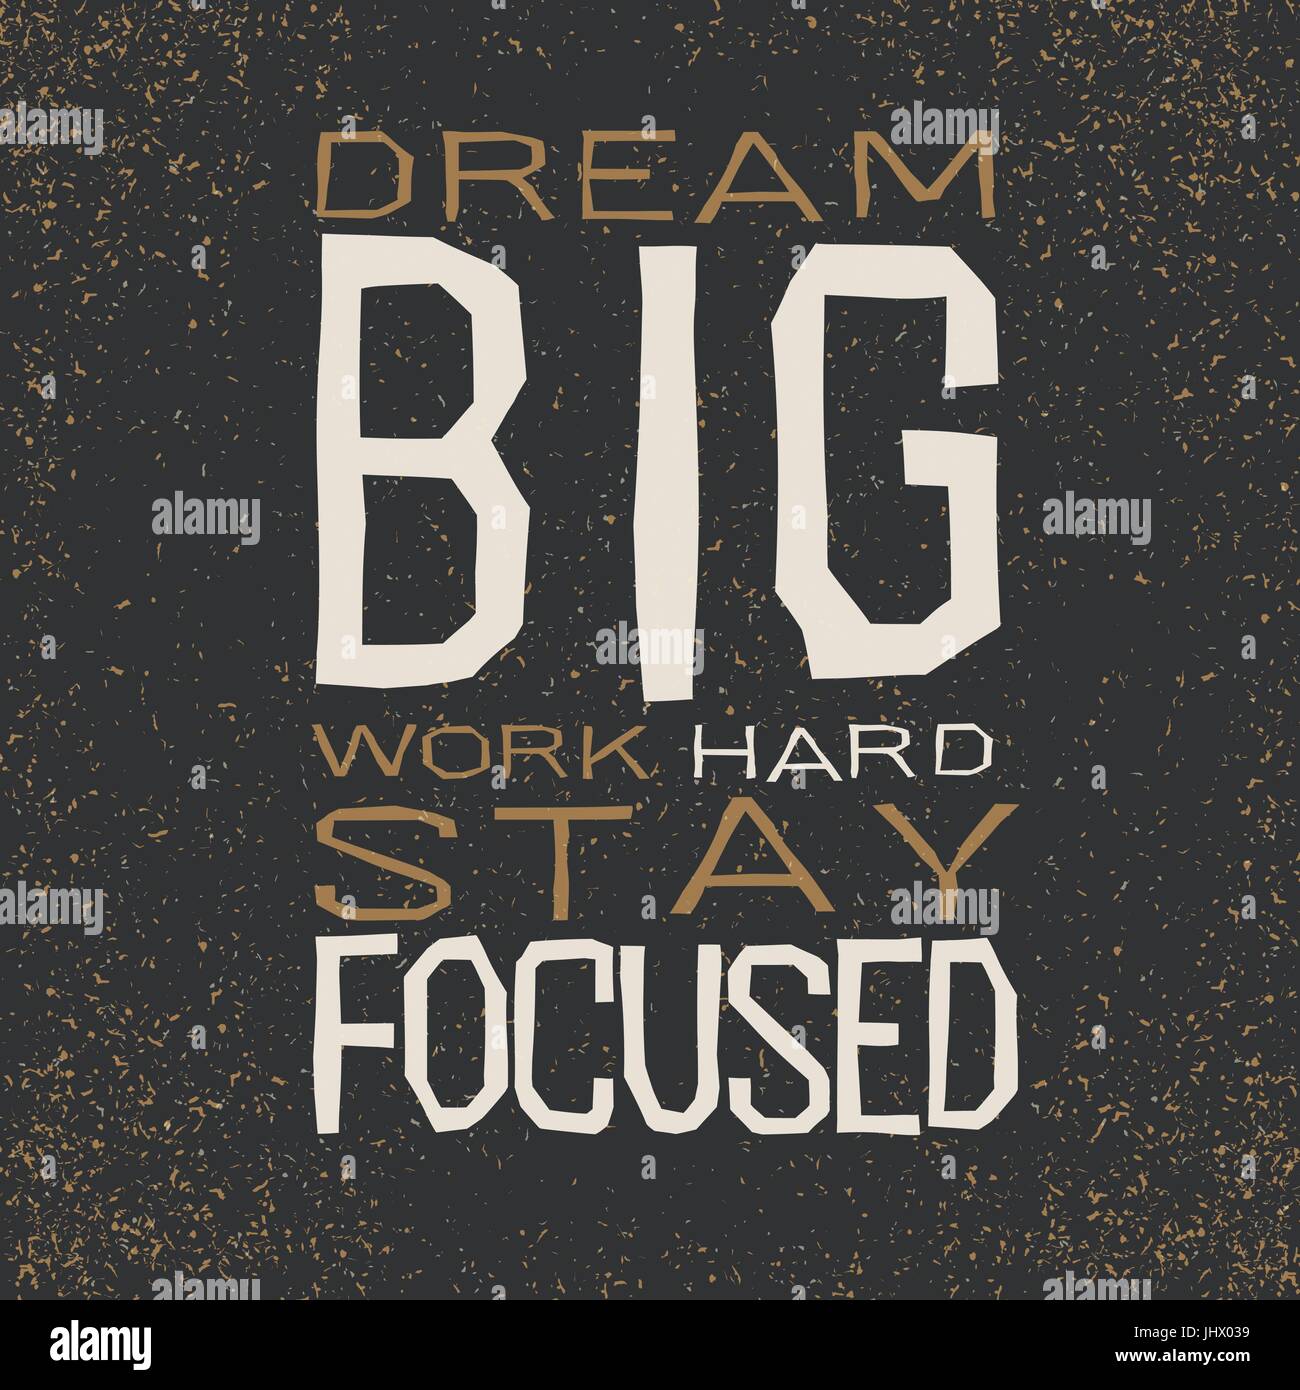 Stay Focused Wallpaper - iXpap | Stay focused, Motivational wallpaper, Focus